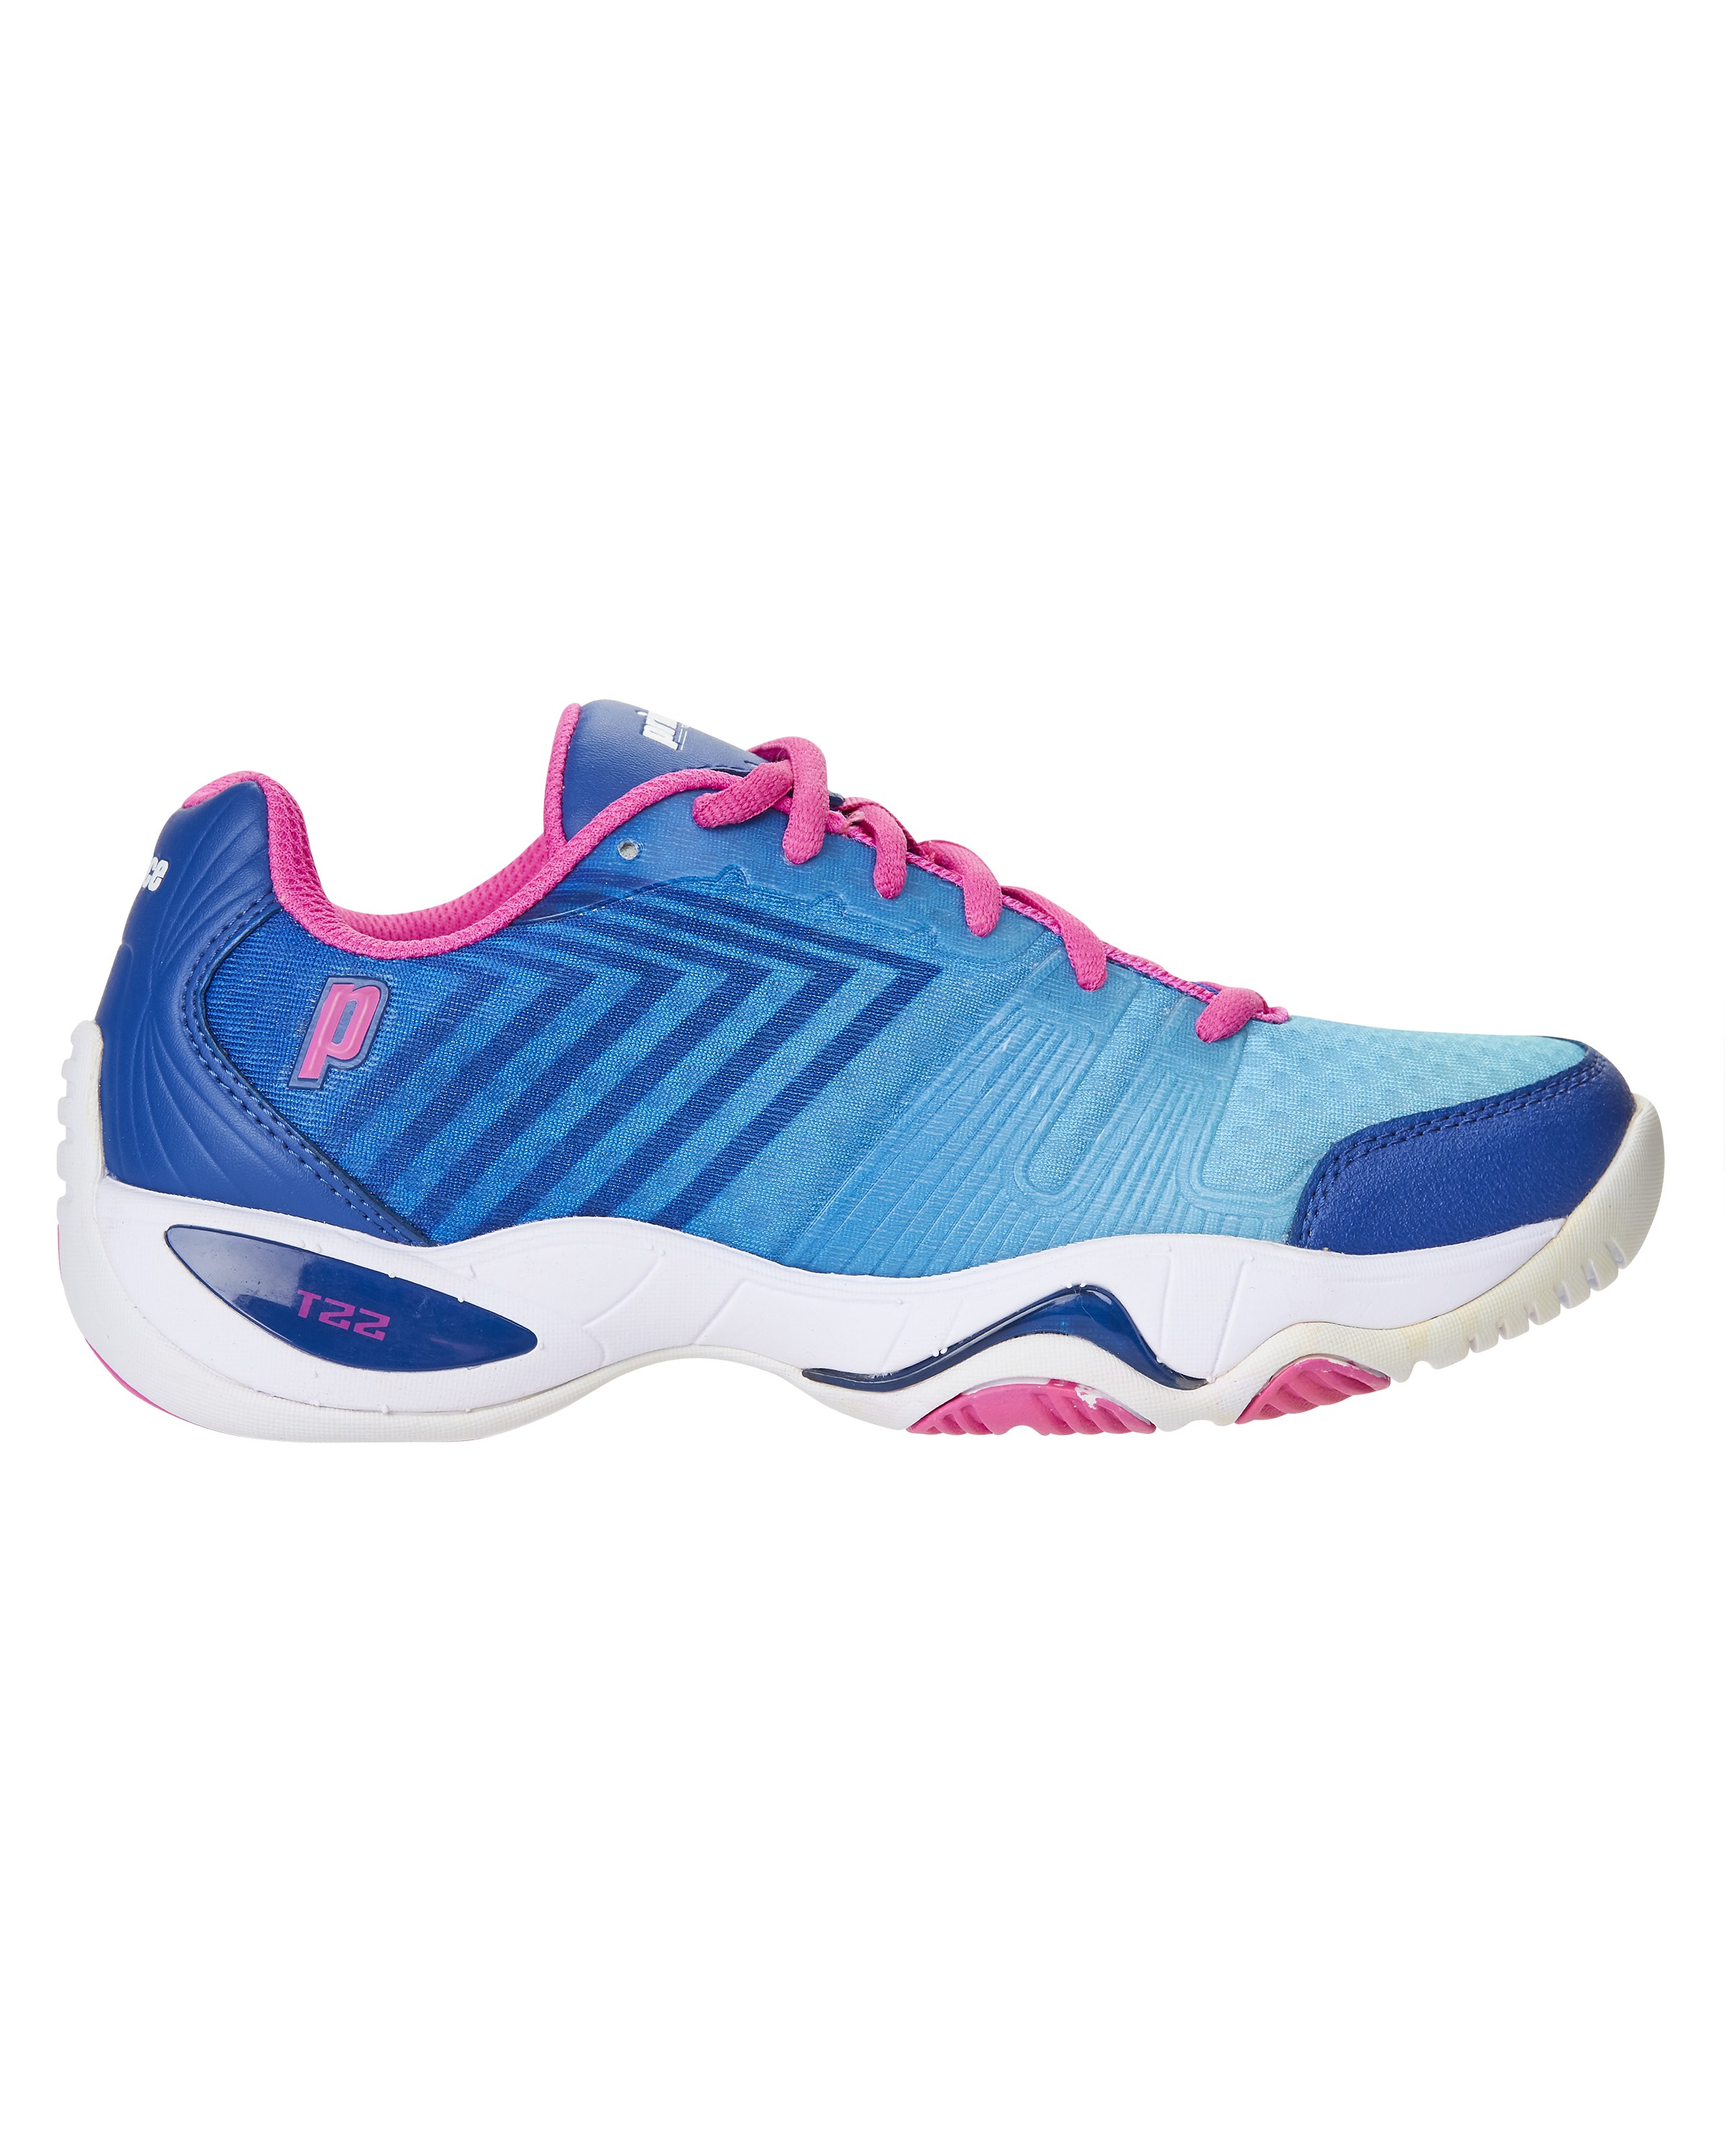 Prince T22 Lite Ocean/White/Pink Womens Shoes 